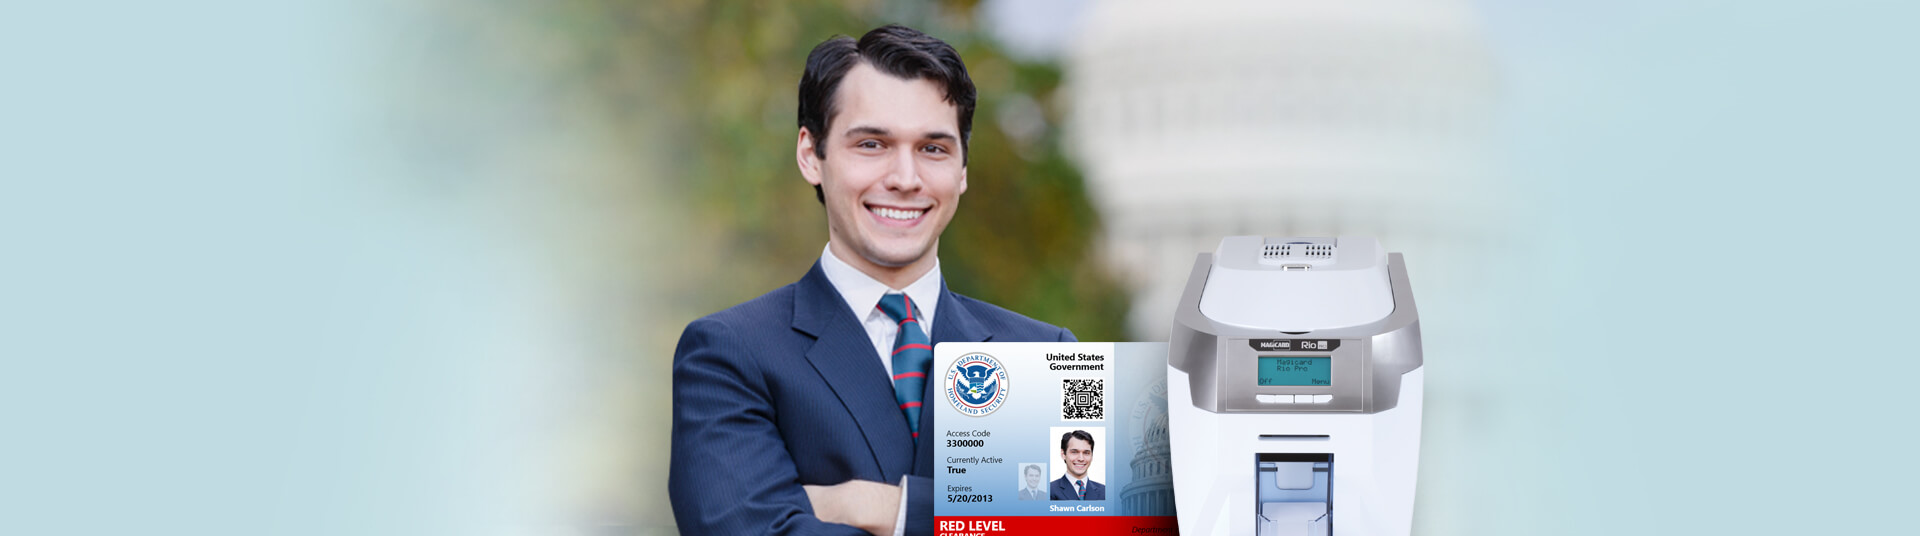 Government ID Badges